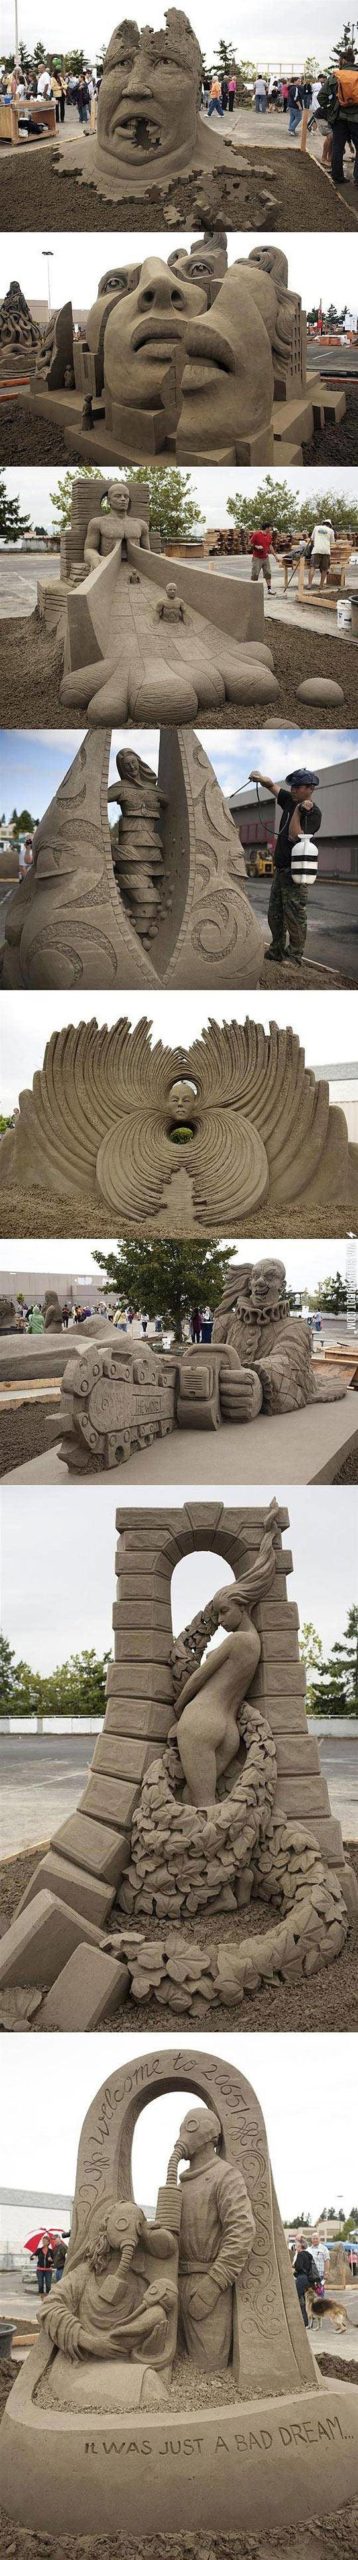 Sand+Sculpting+At+Its+Best